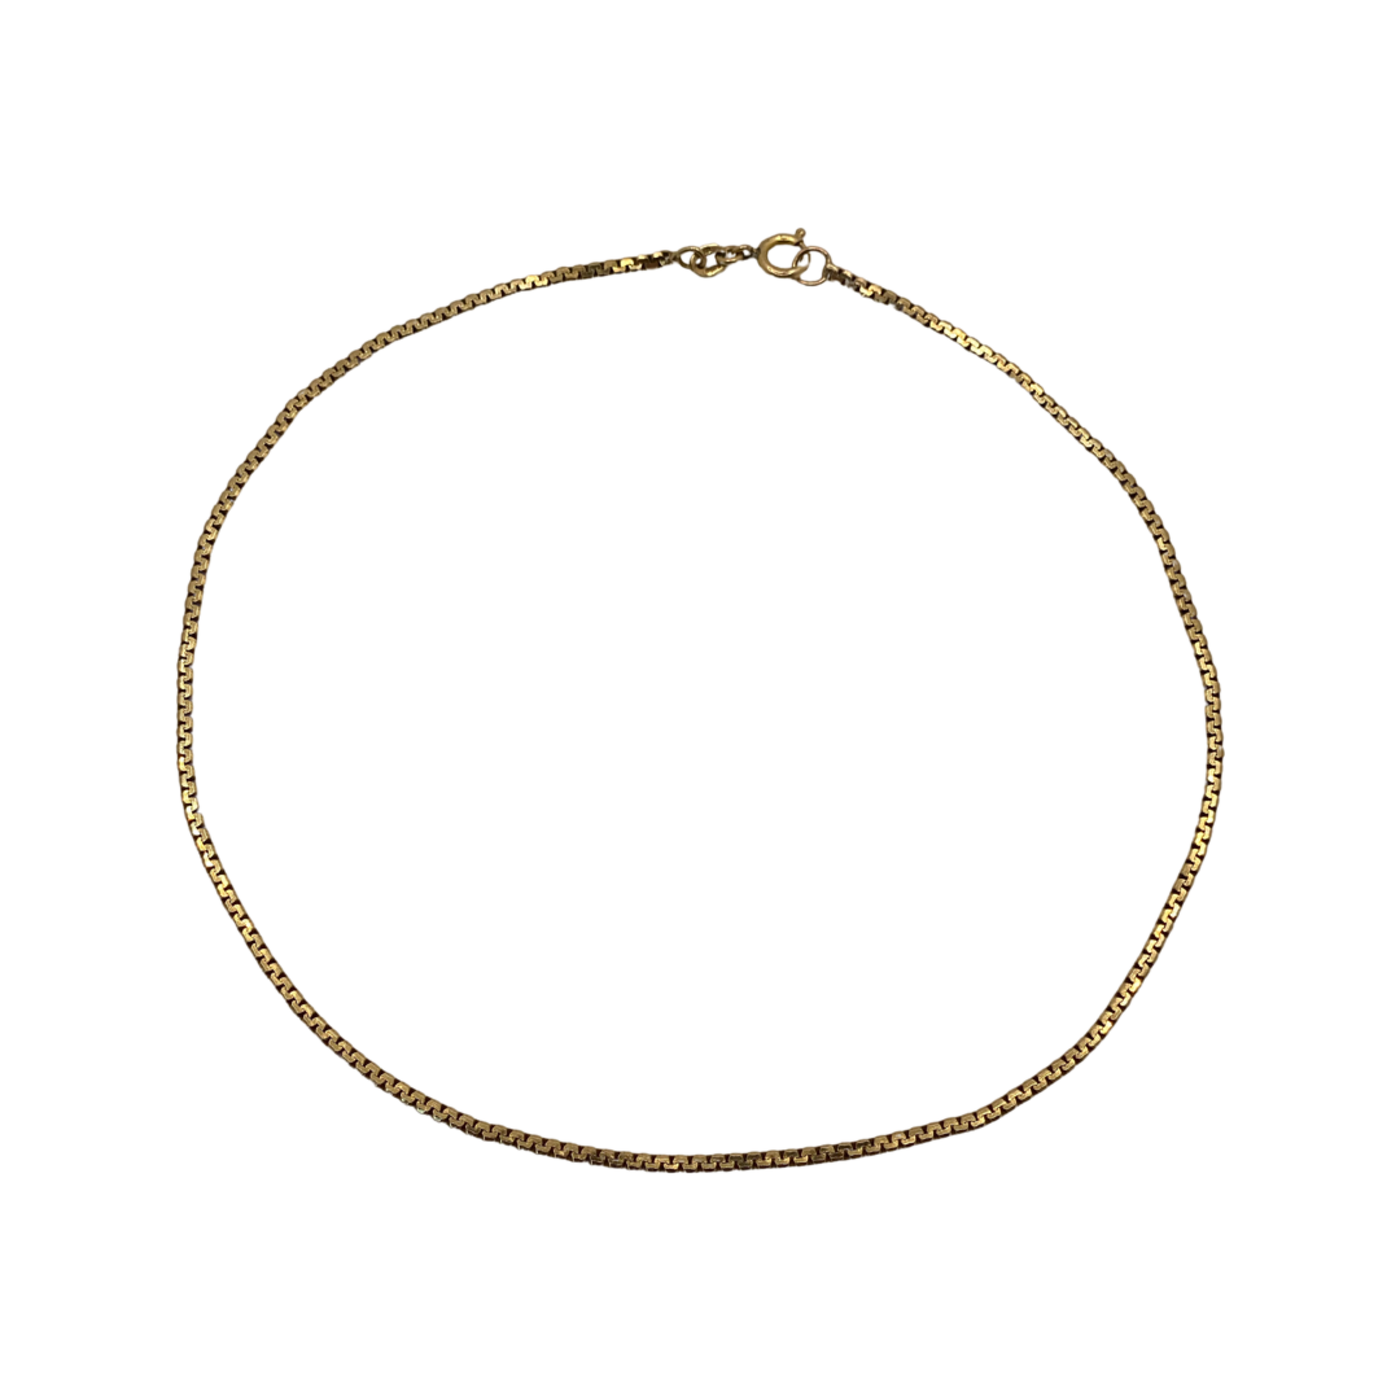 9ct Gold Slinky Chain Necklace